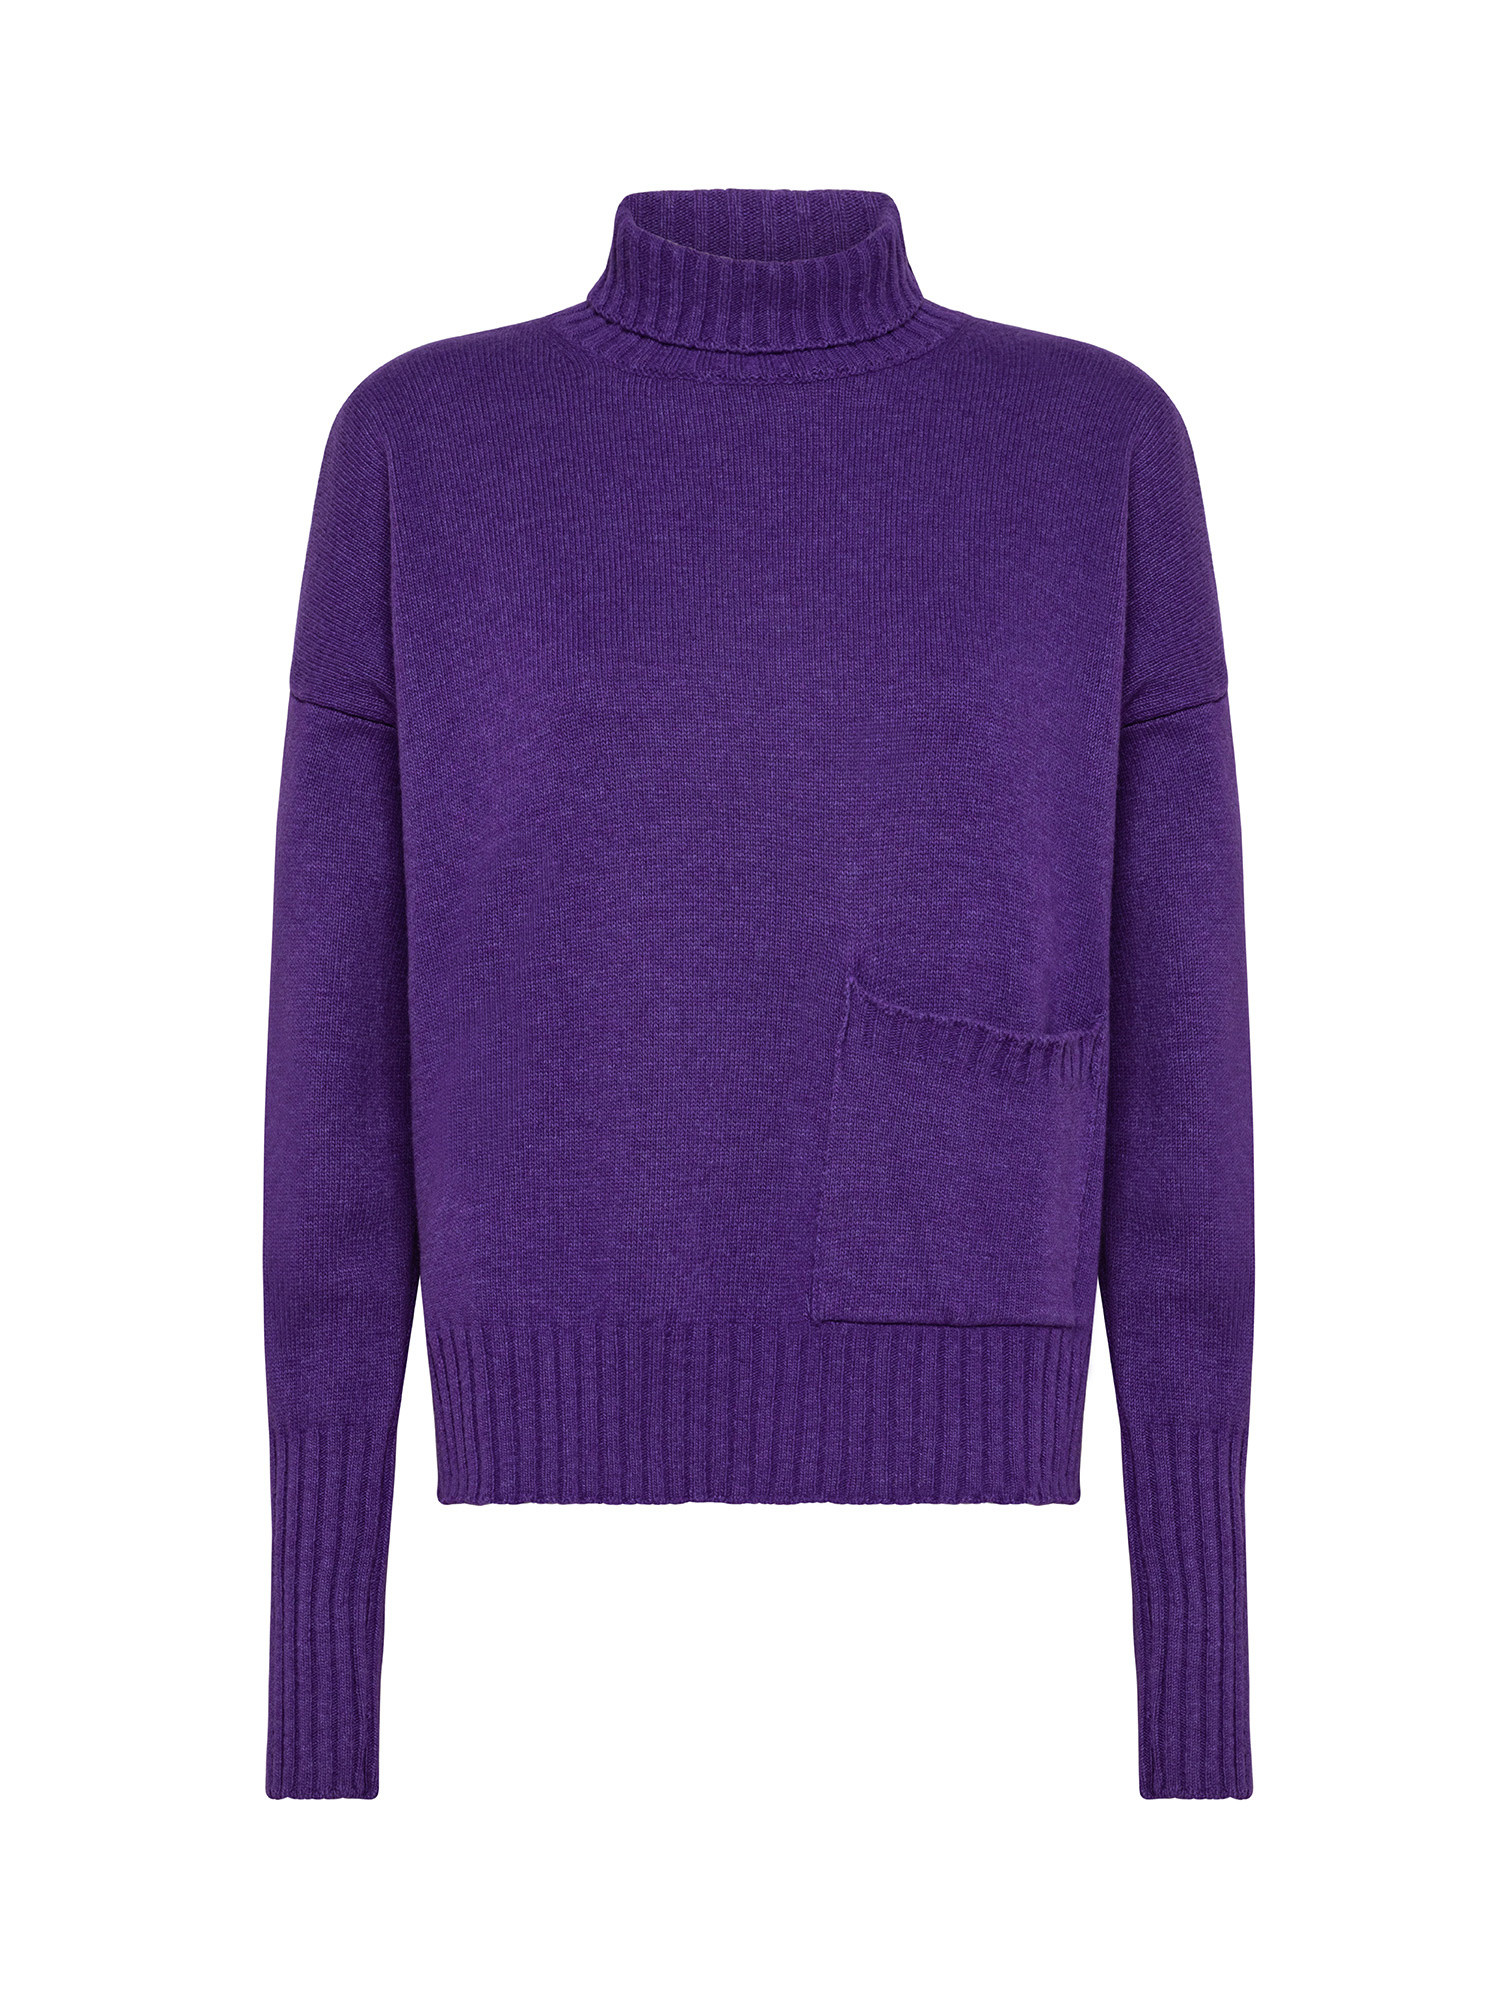 K Collection - Crater neck sweater, Purple, large image number 0